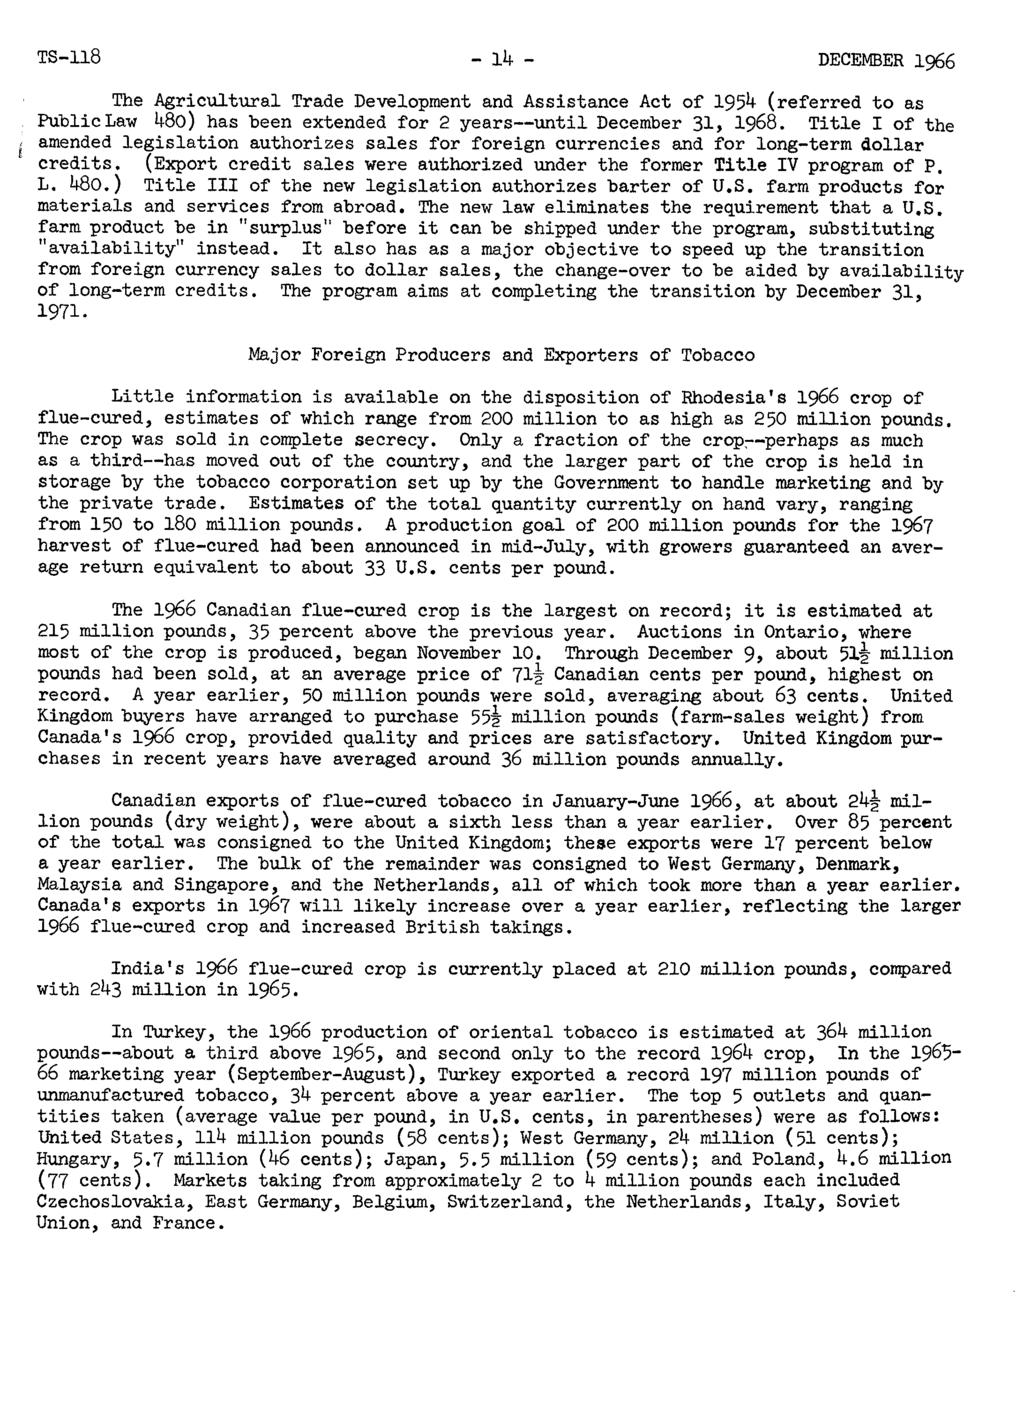 TS-ll8-14 - DECEMBER 1966 The Agricultural Trade Development and Assistance Act of 1954 (referred to as PublicLaw 48) has been extended for 2 years--until December 31, 1968.